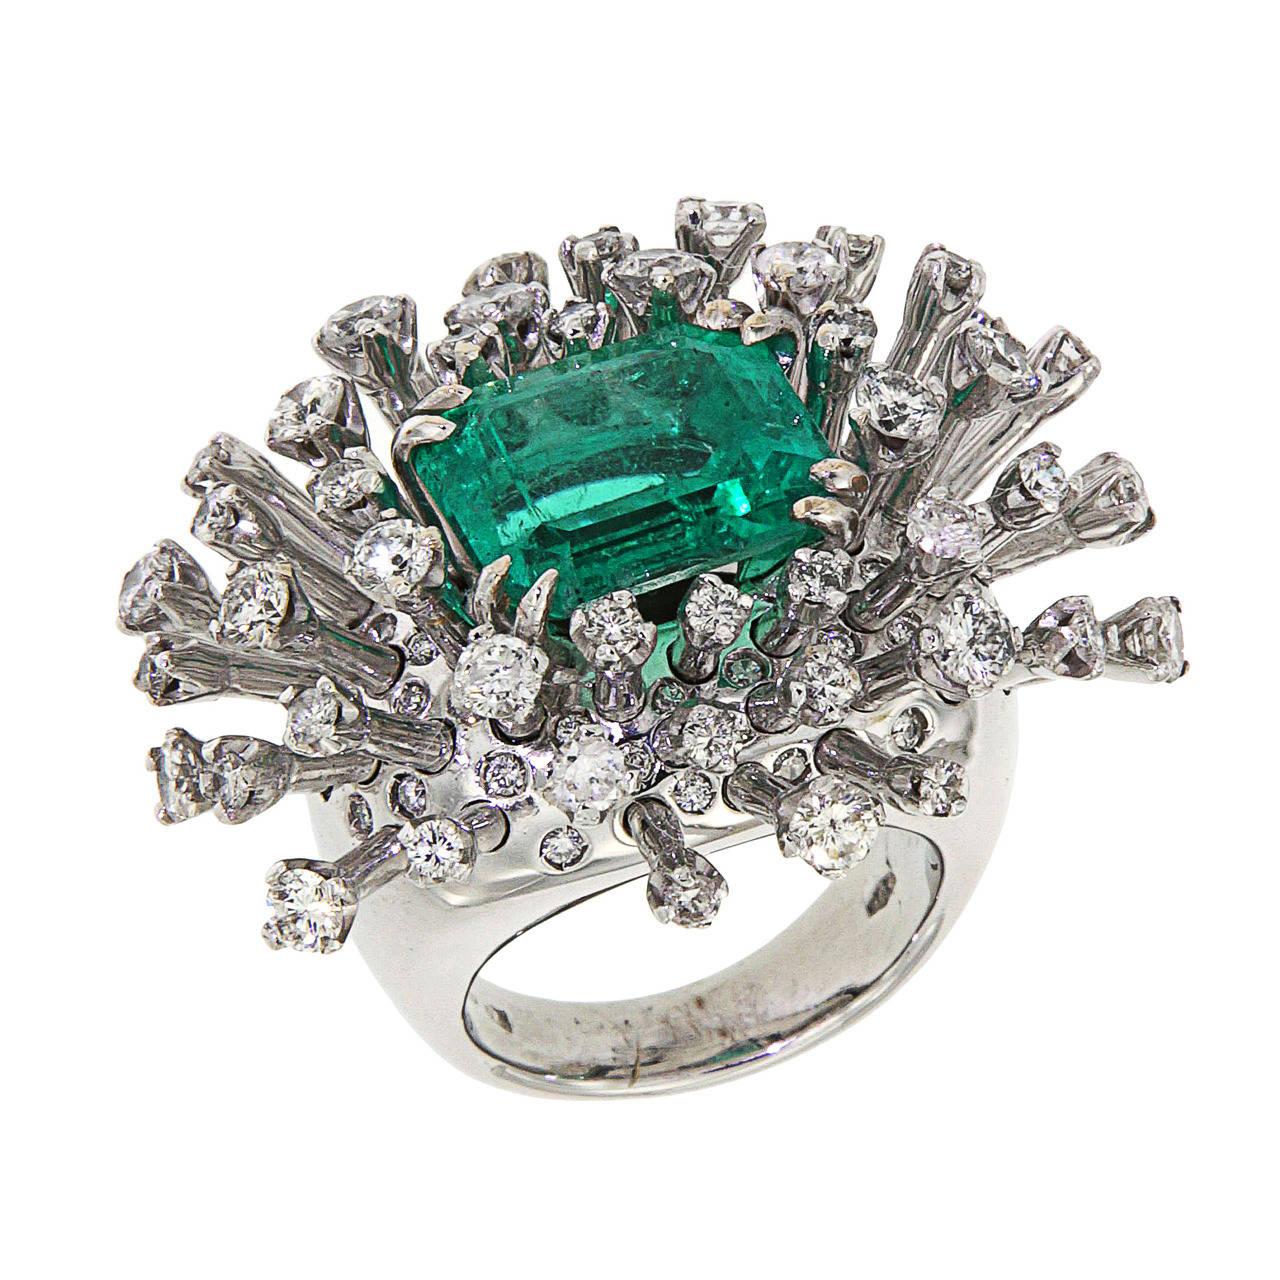 Stunning Columbian emerald Sea Anemone ring inspired by symbiosis, spectacular and show-stopping, it brings natural emeralds and diamonds together to create a harmonious unison between the clownfish and the sea anemone. A vibrant sea-green Columbian